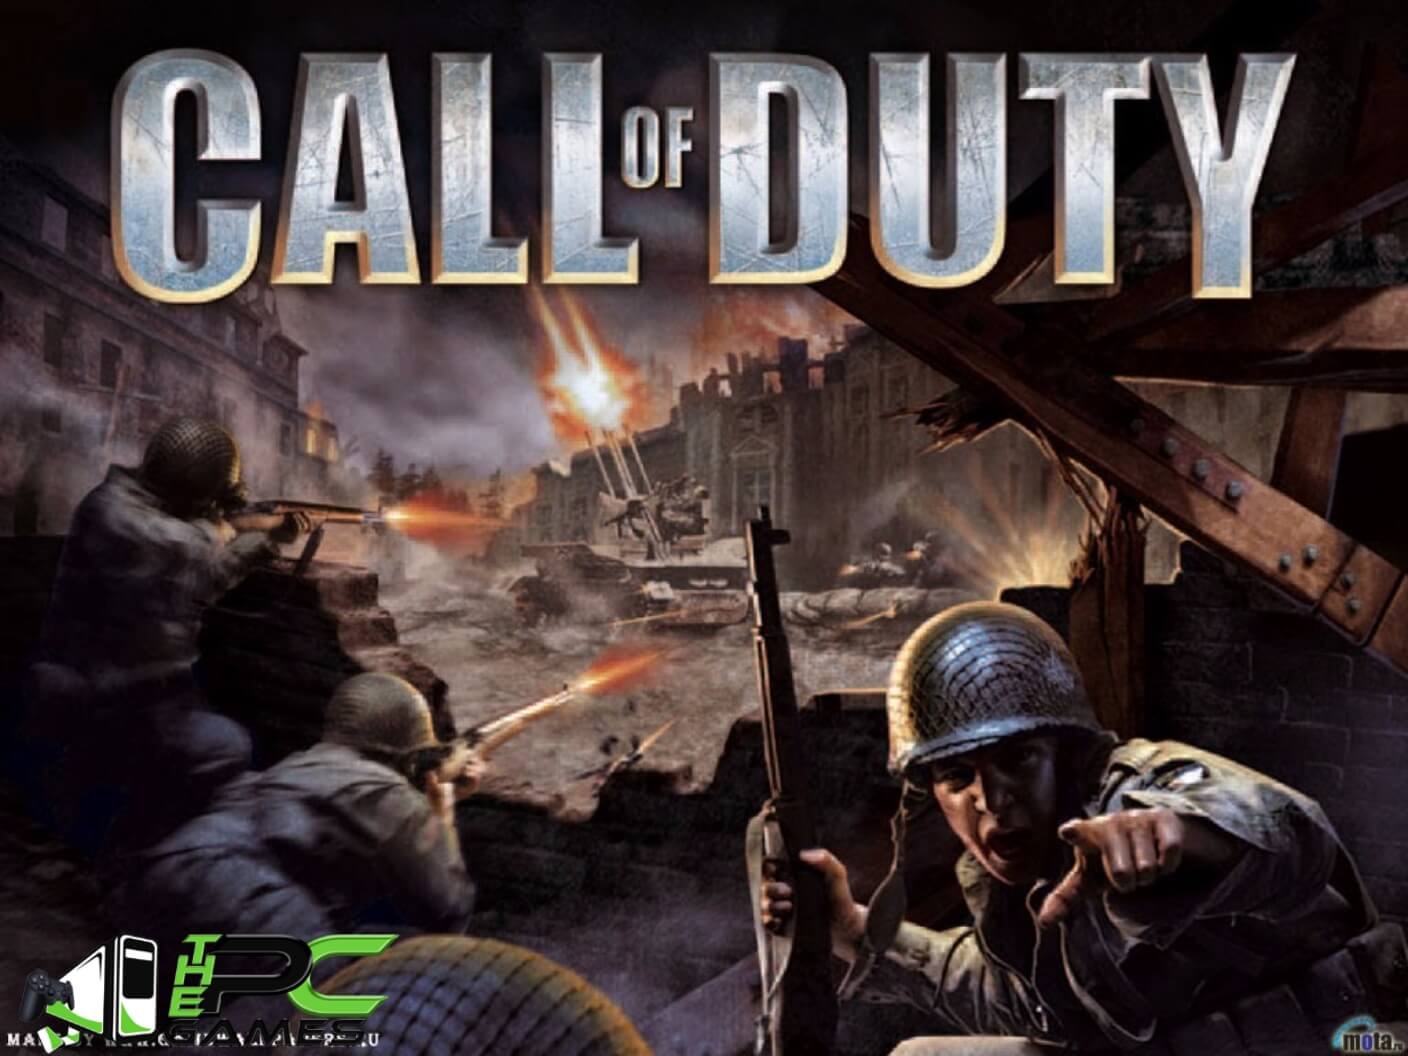 Free download game pc call of duty 6 7